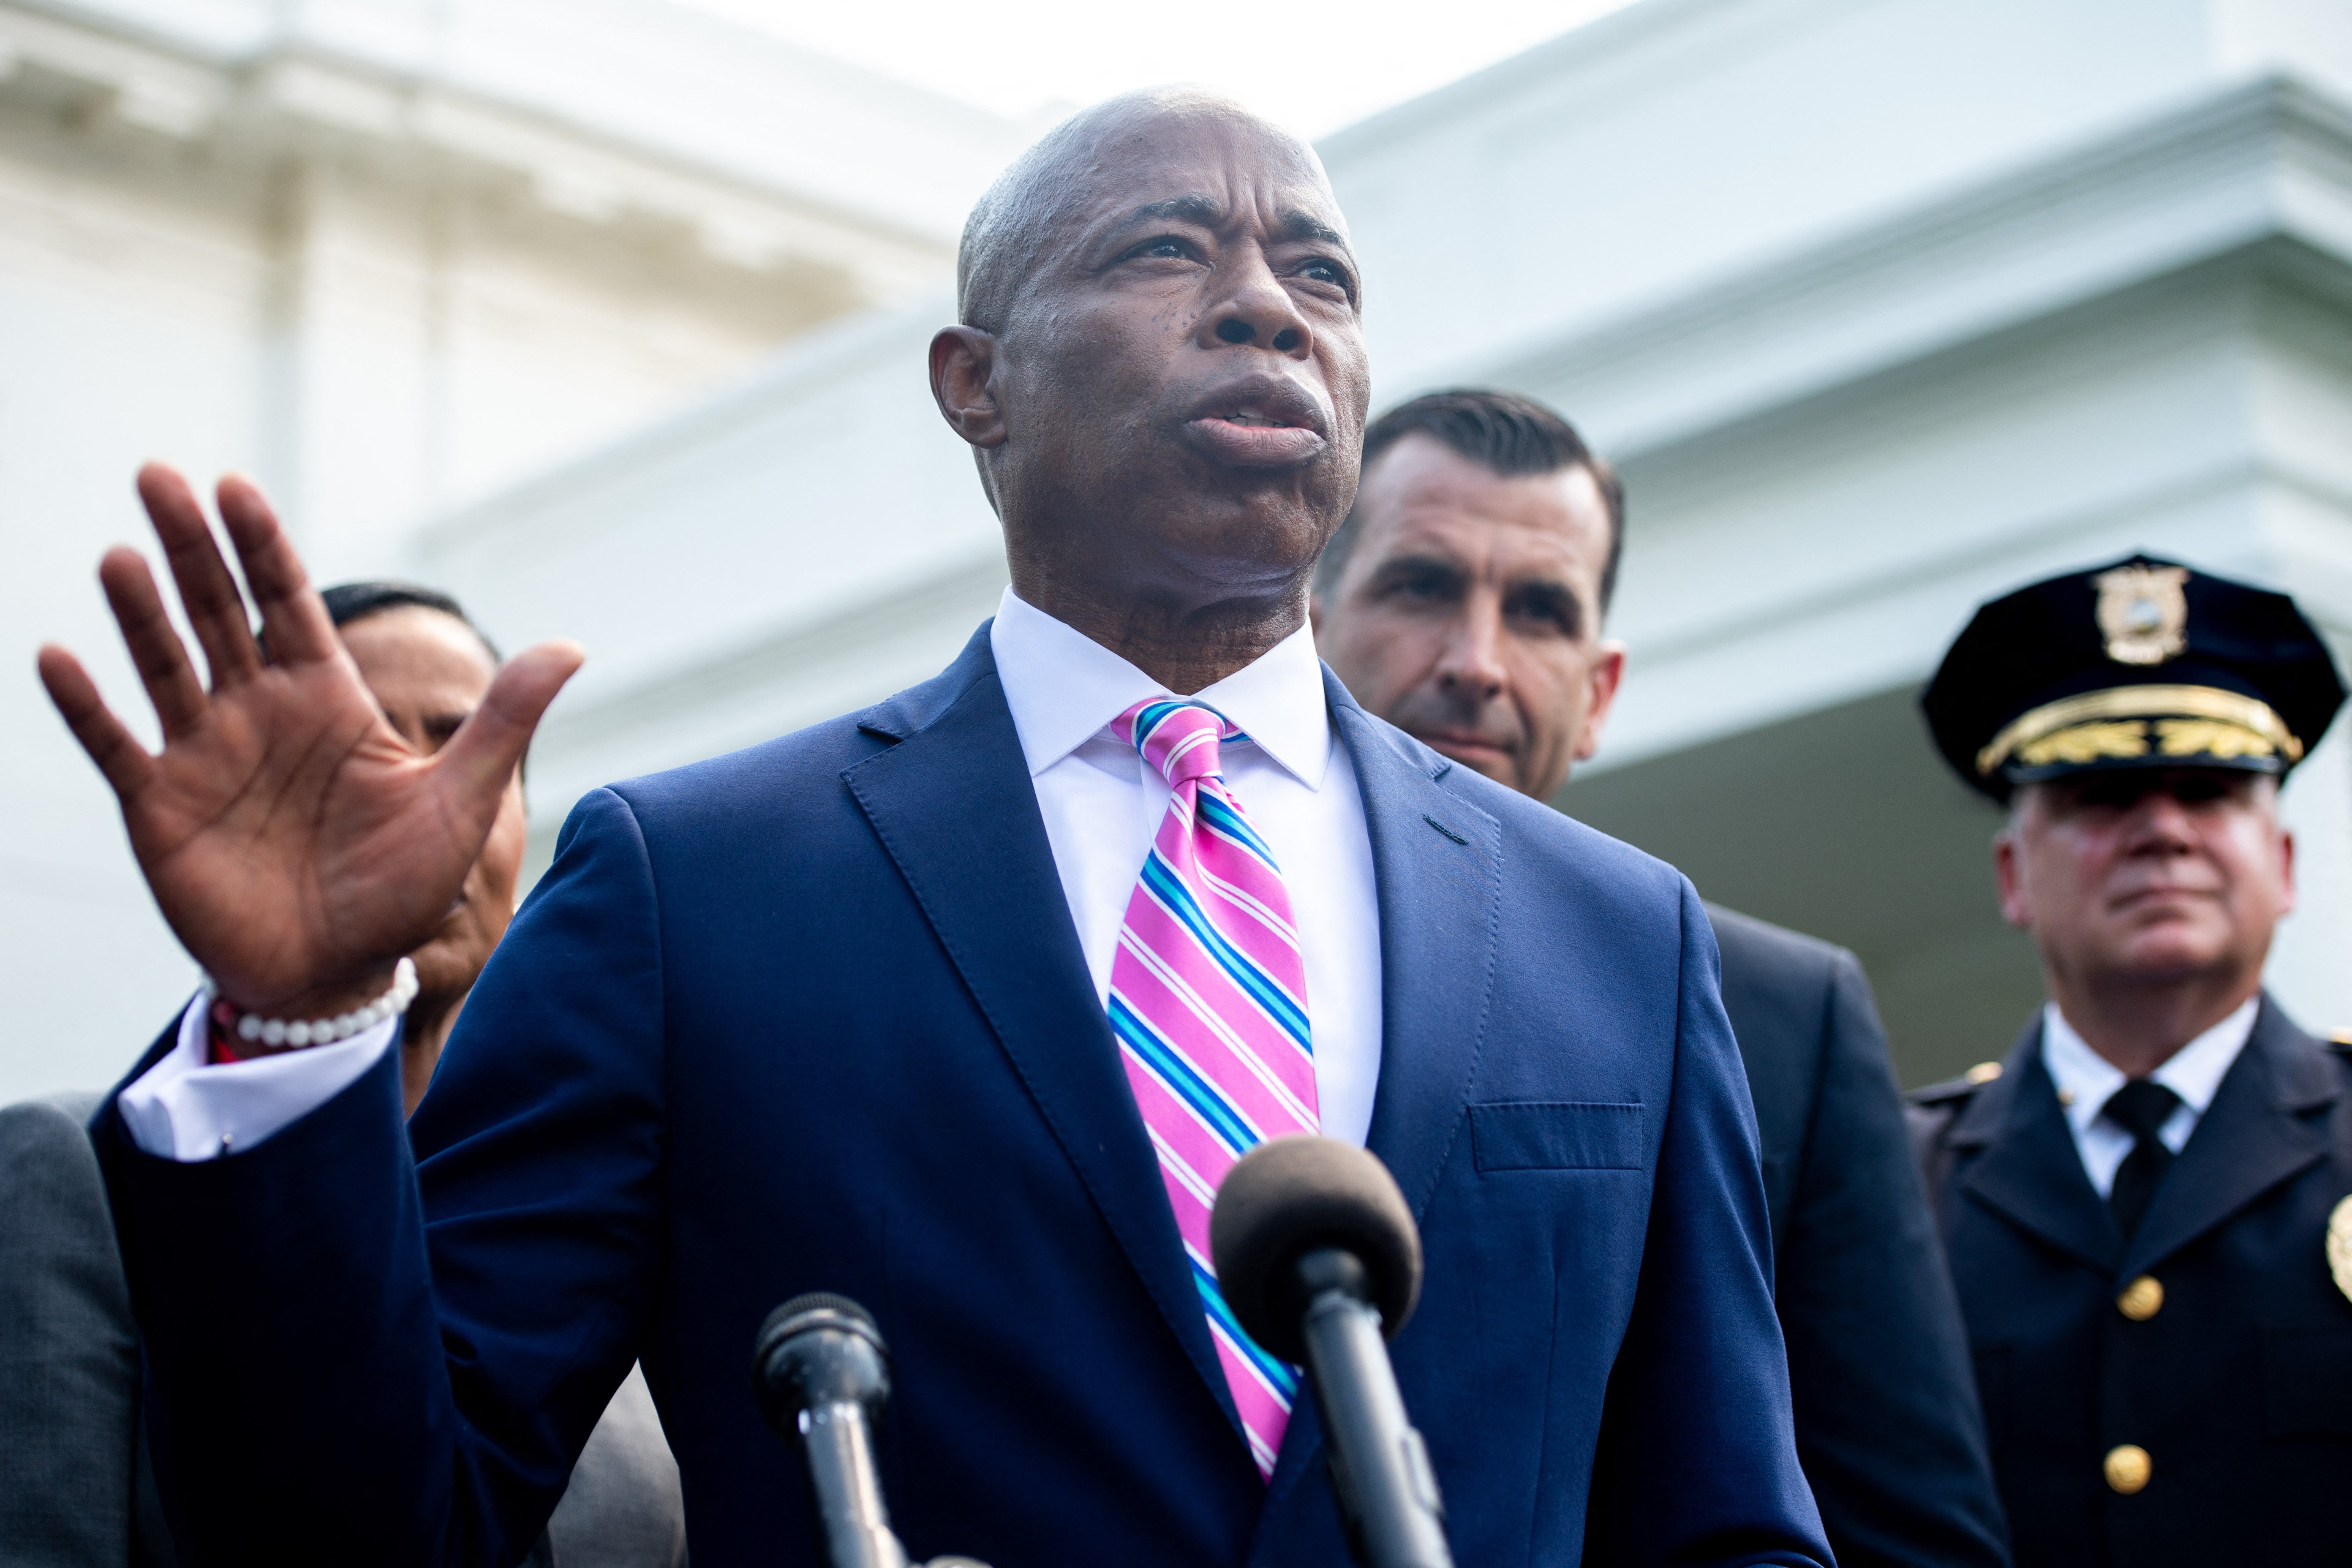 Brooklyn Borough President and New York City mayoral candidate Eric Adams (C) speaks to the media alongside other local and law enforcement officials outside the West Wing of the White House in Washington, DC, July 12, 2021